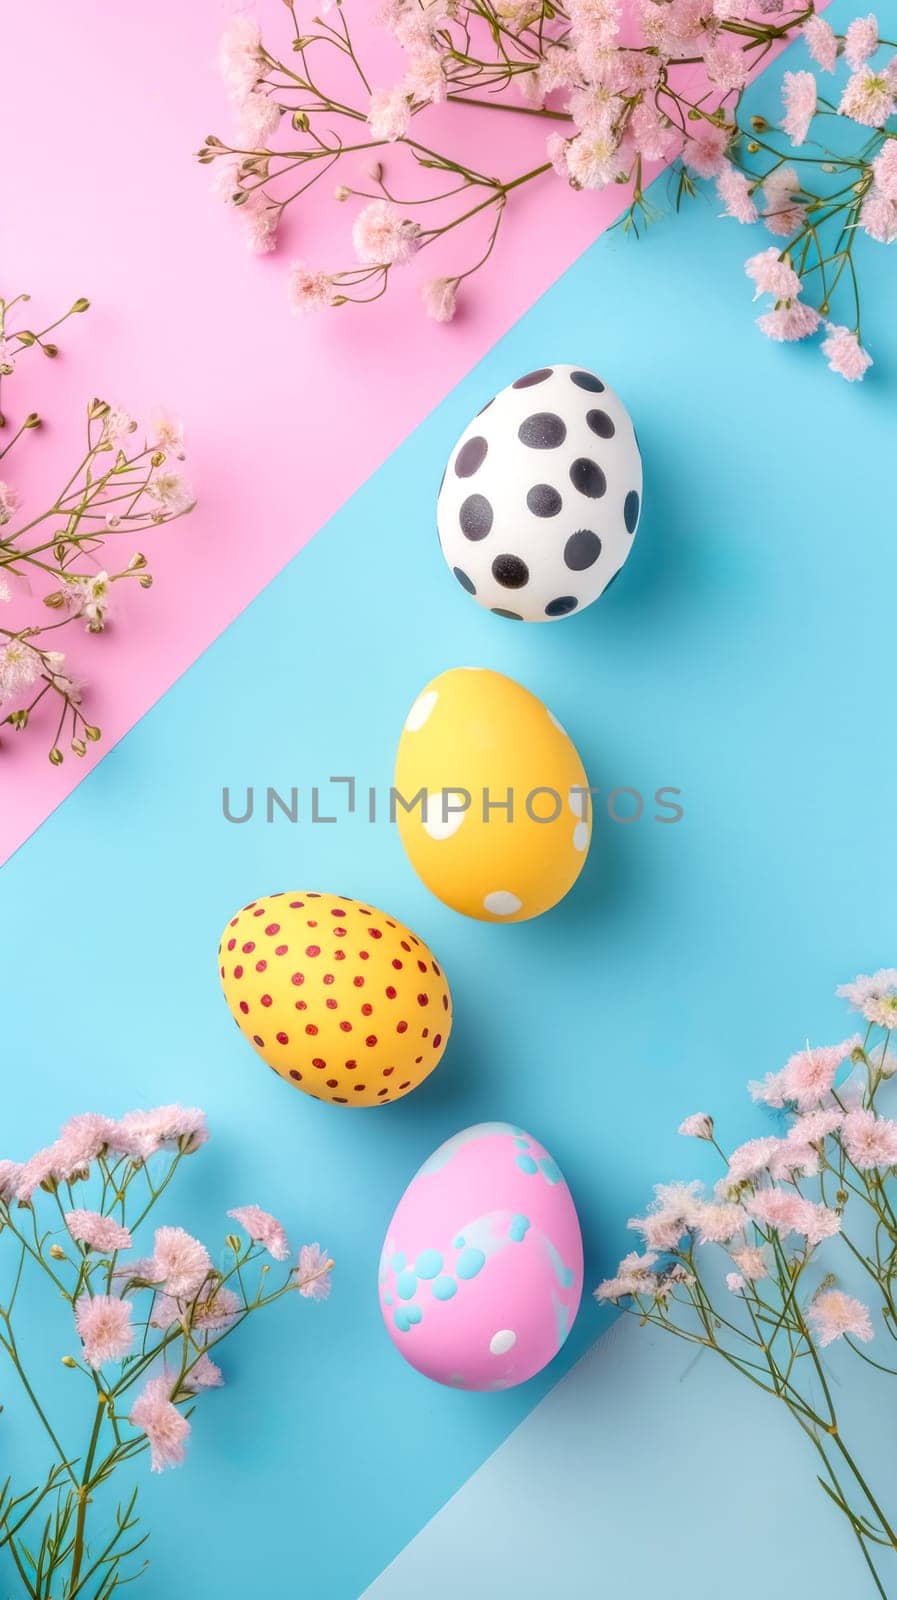 Easter composition in a minimalist style, with pastel-colored eggs adorned with various patterns, set against a split pink and blue background, delicate pink flowers, springtime atmosphere